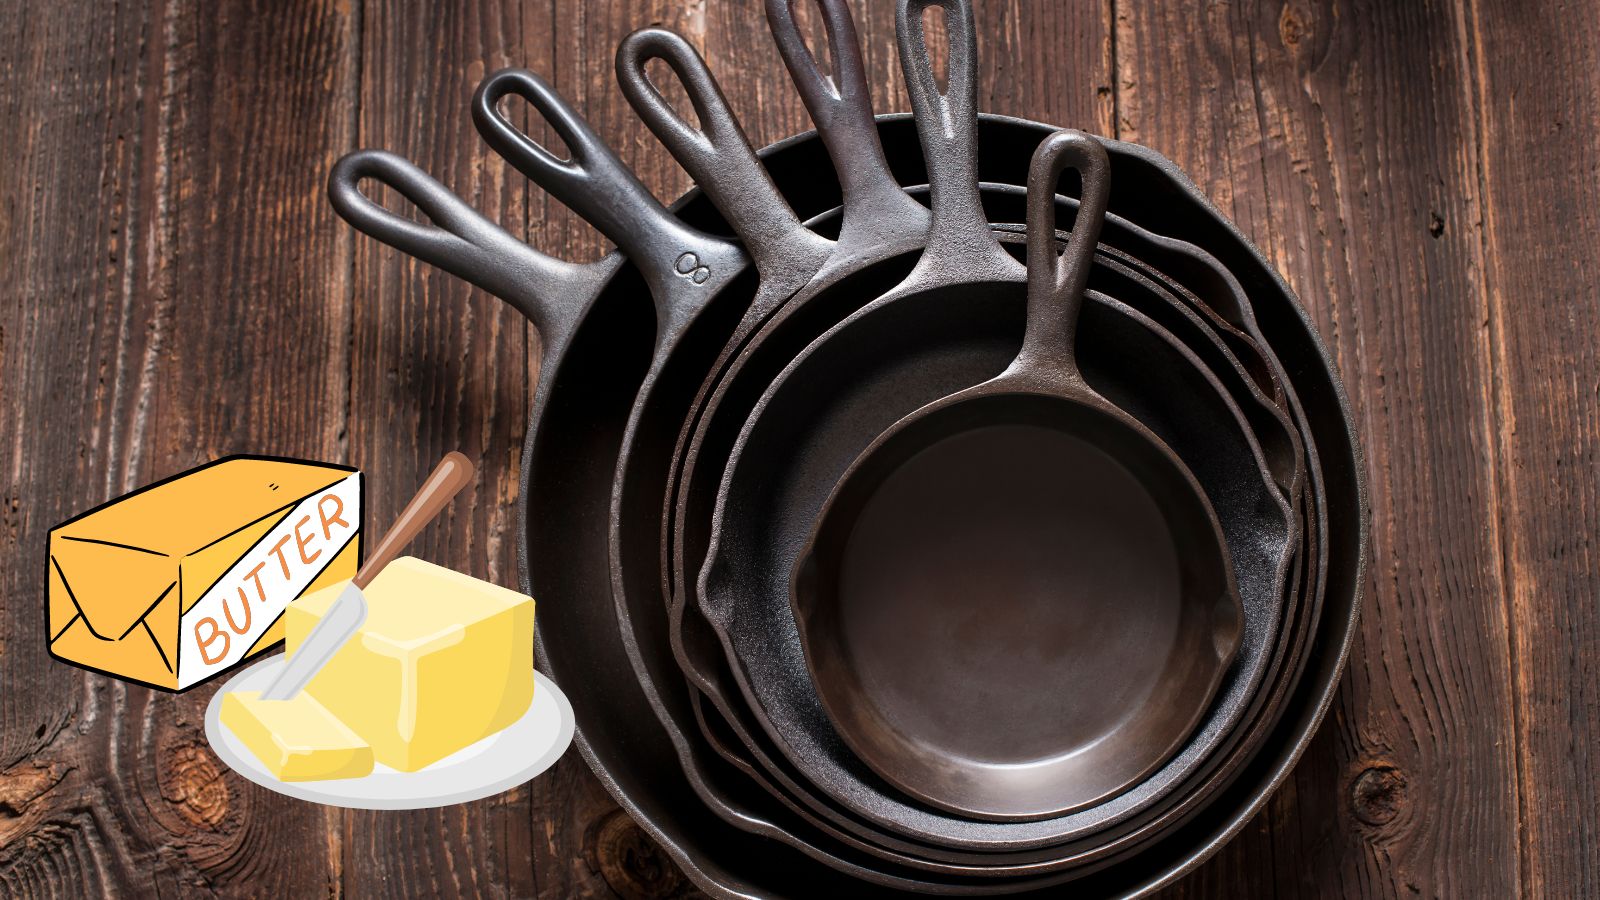 Using butter to season cast iron - familyguidecentral.com